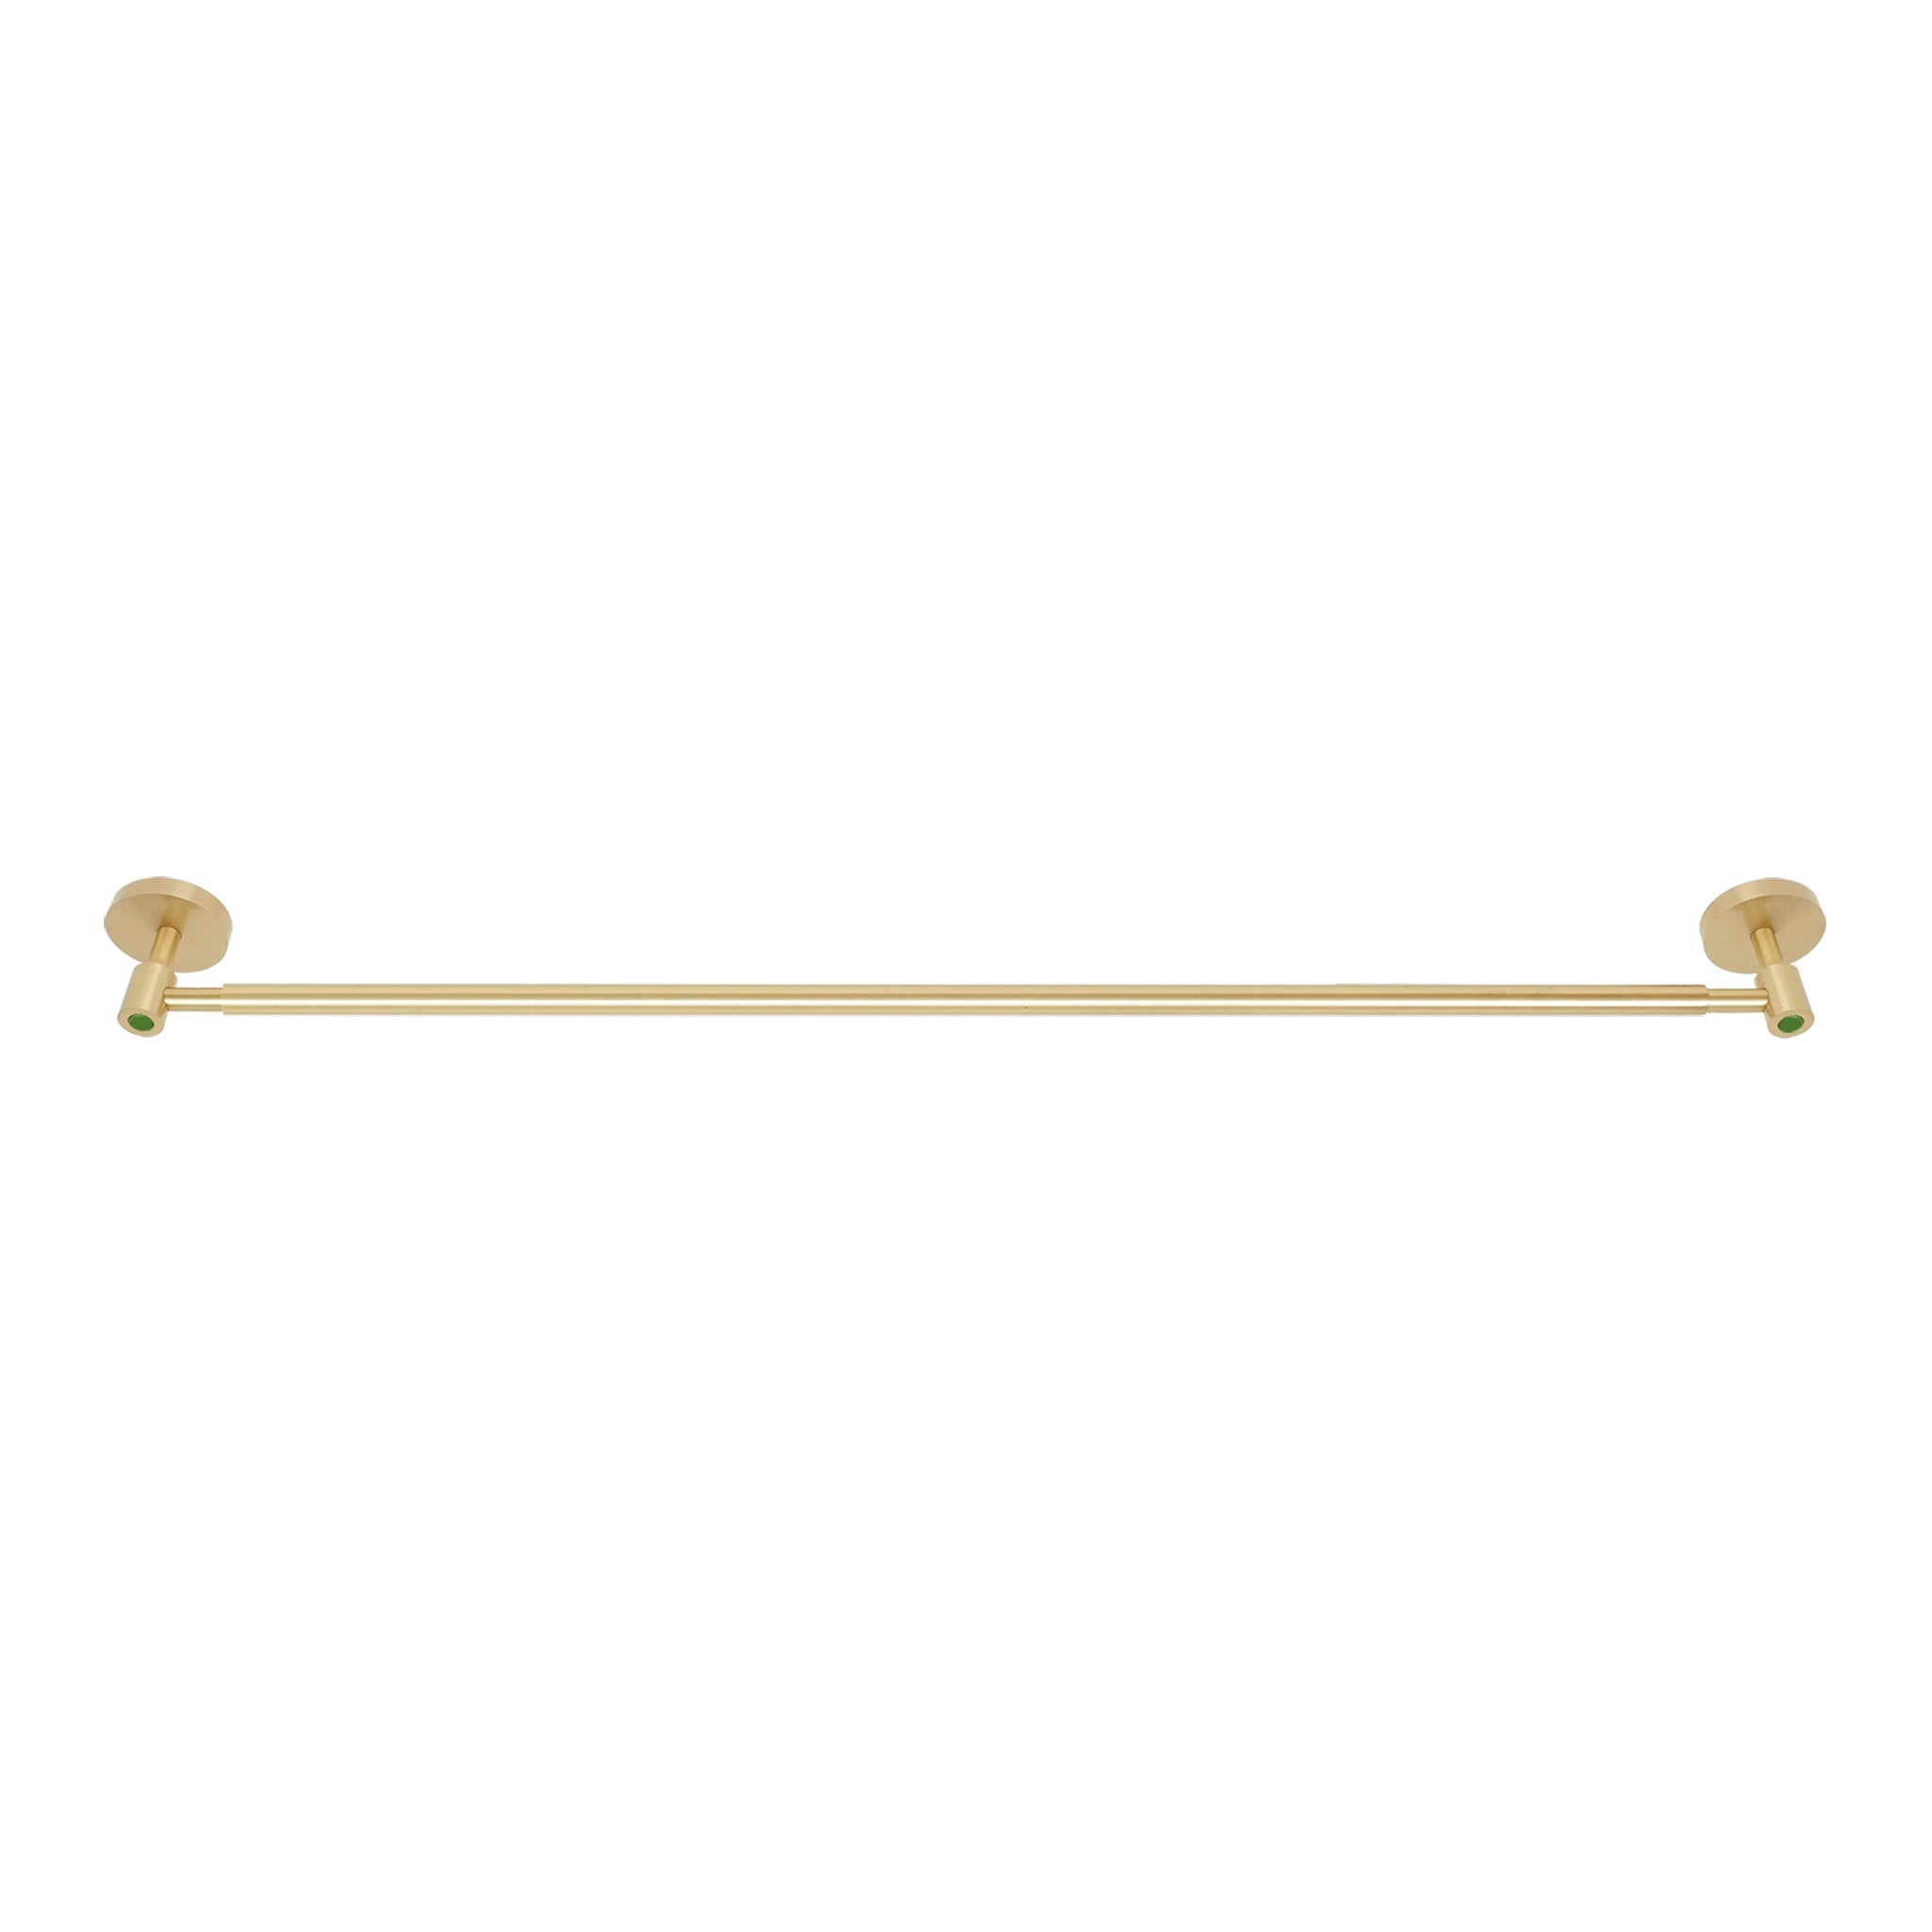 Brass and python green color Head towel bar 24" Dutton Brown hardware